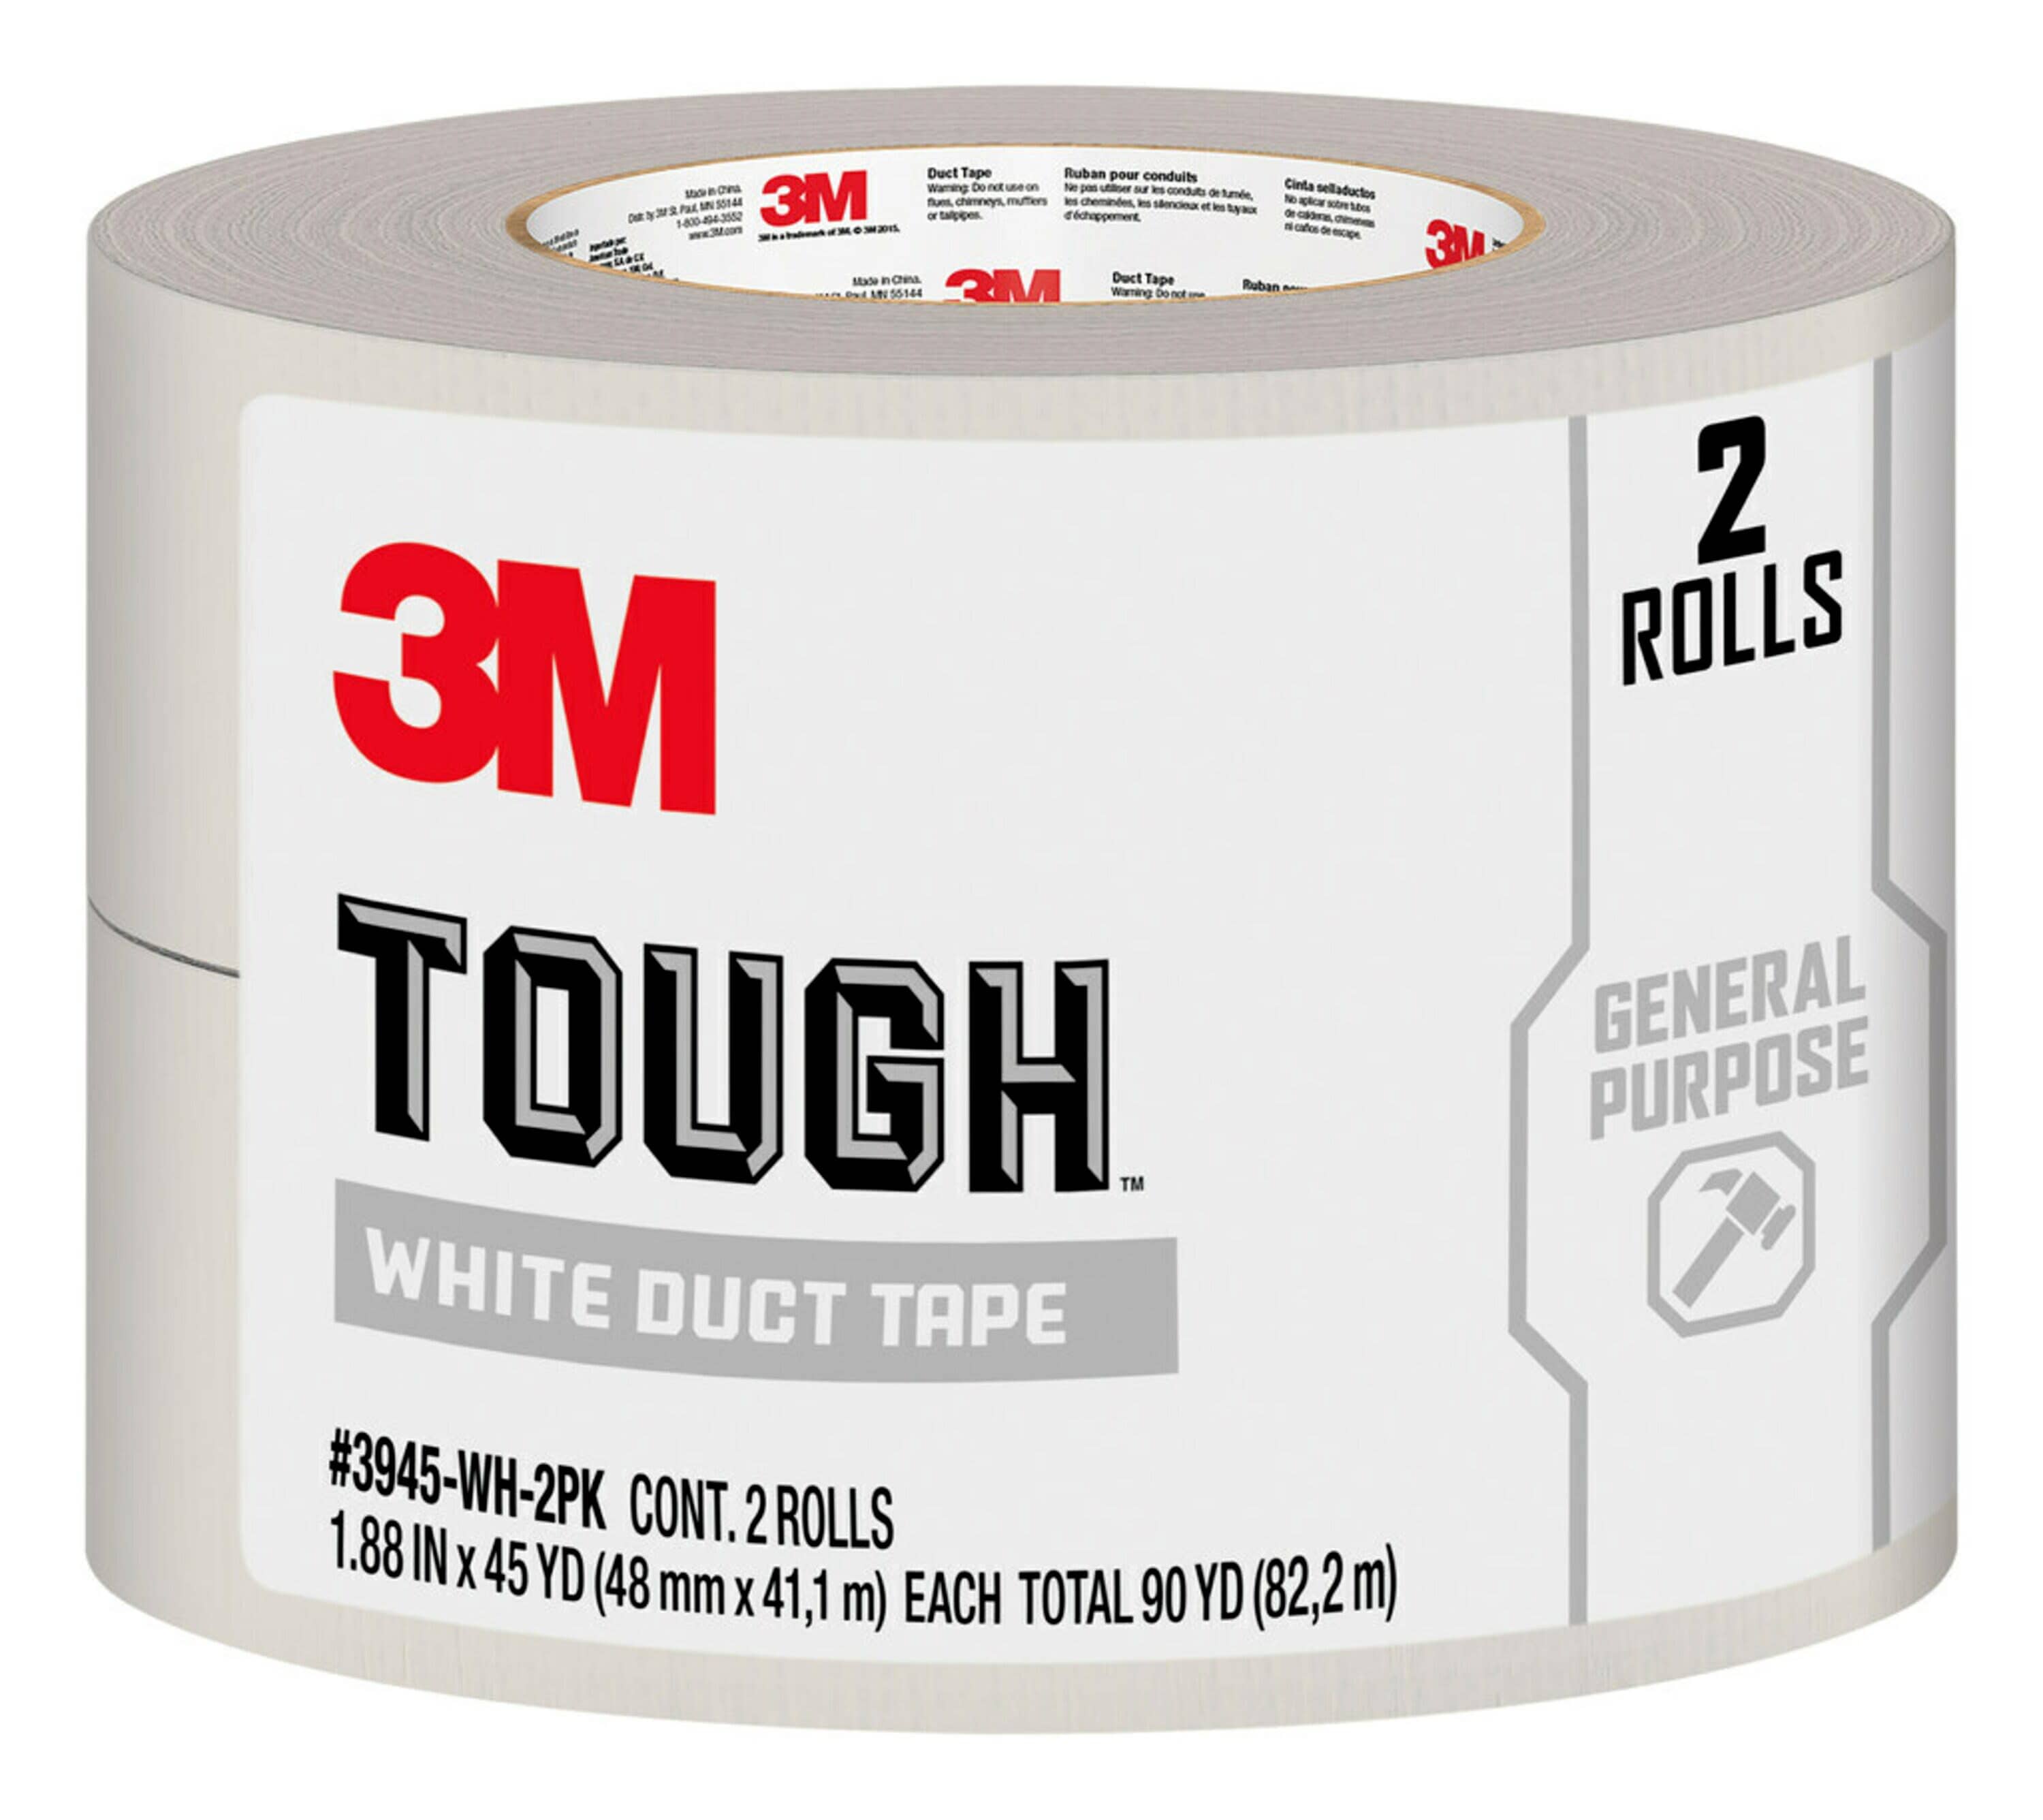 Have a question about 3M 13.8 oz. Super 77 Multipurpose Spray Adhesive? -  Pg 2 - The Home Depot